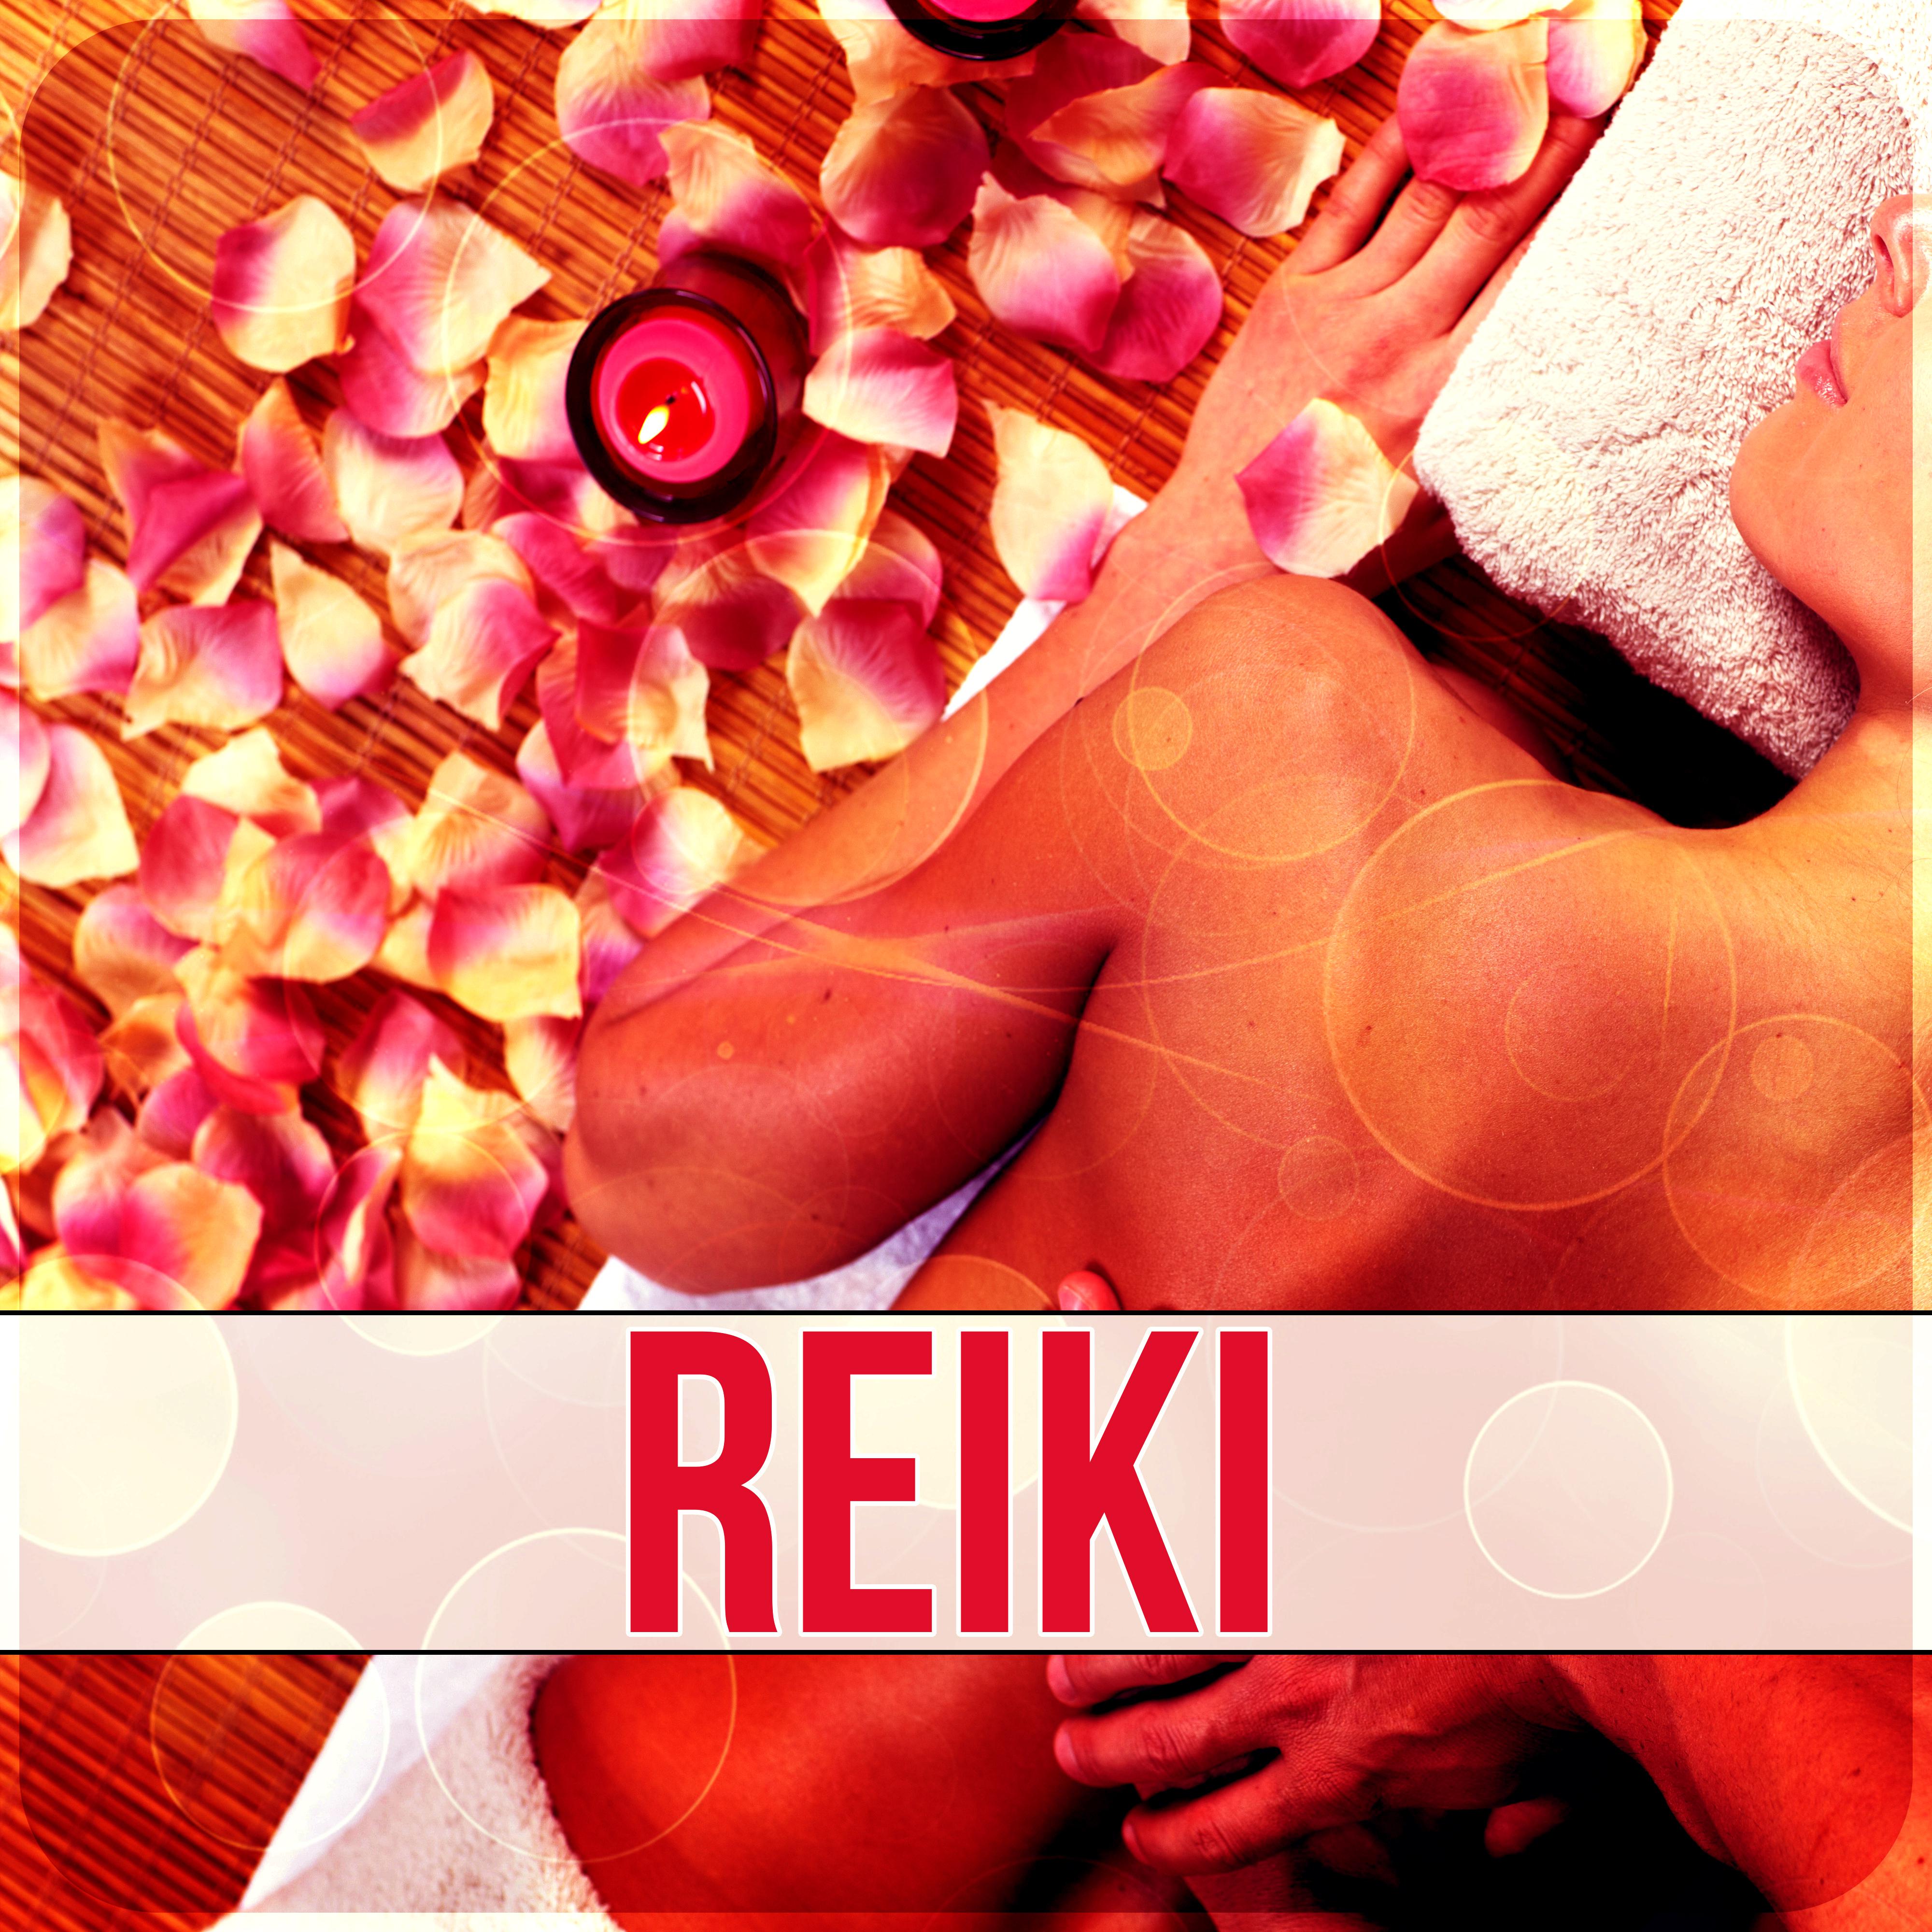 Reiki - Natural White Noise and Sounds of Nature for Deep Sleep, Healing Massage, Restful Sleep